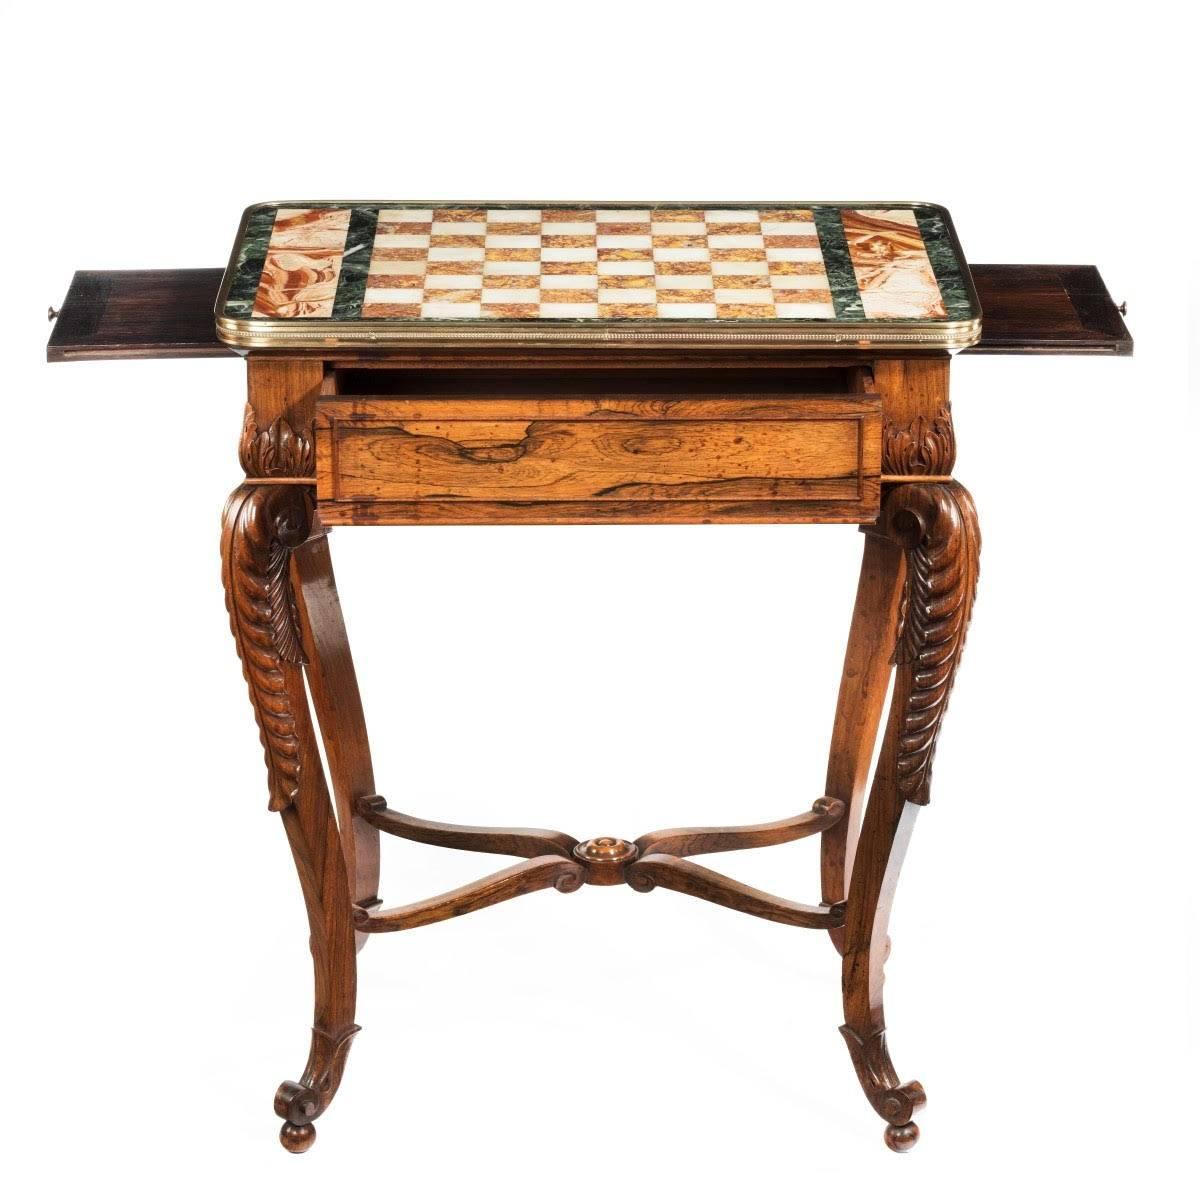 The rectangular top with a chess board of white and rose/yellow sienna marble, within grey borders and a brass edge, the frieze with a central drawer and a slide on either end, the cabriole legs carved with acanthus leaves and terminating in scroll